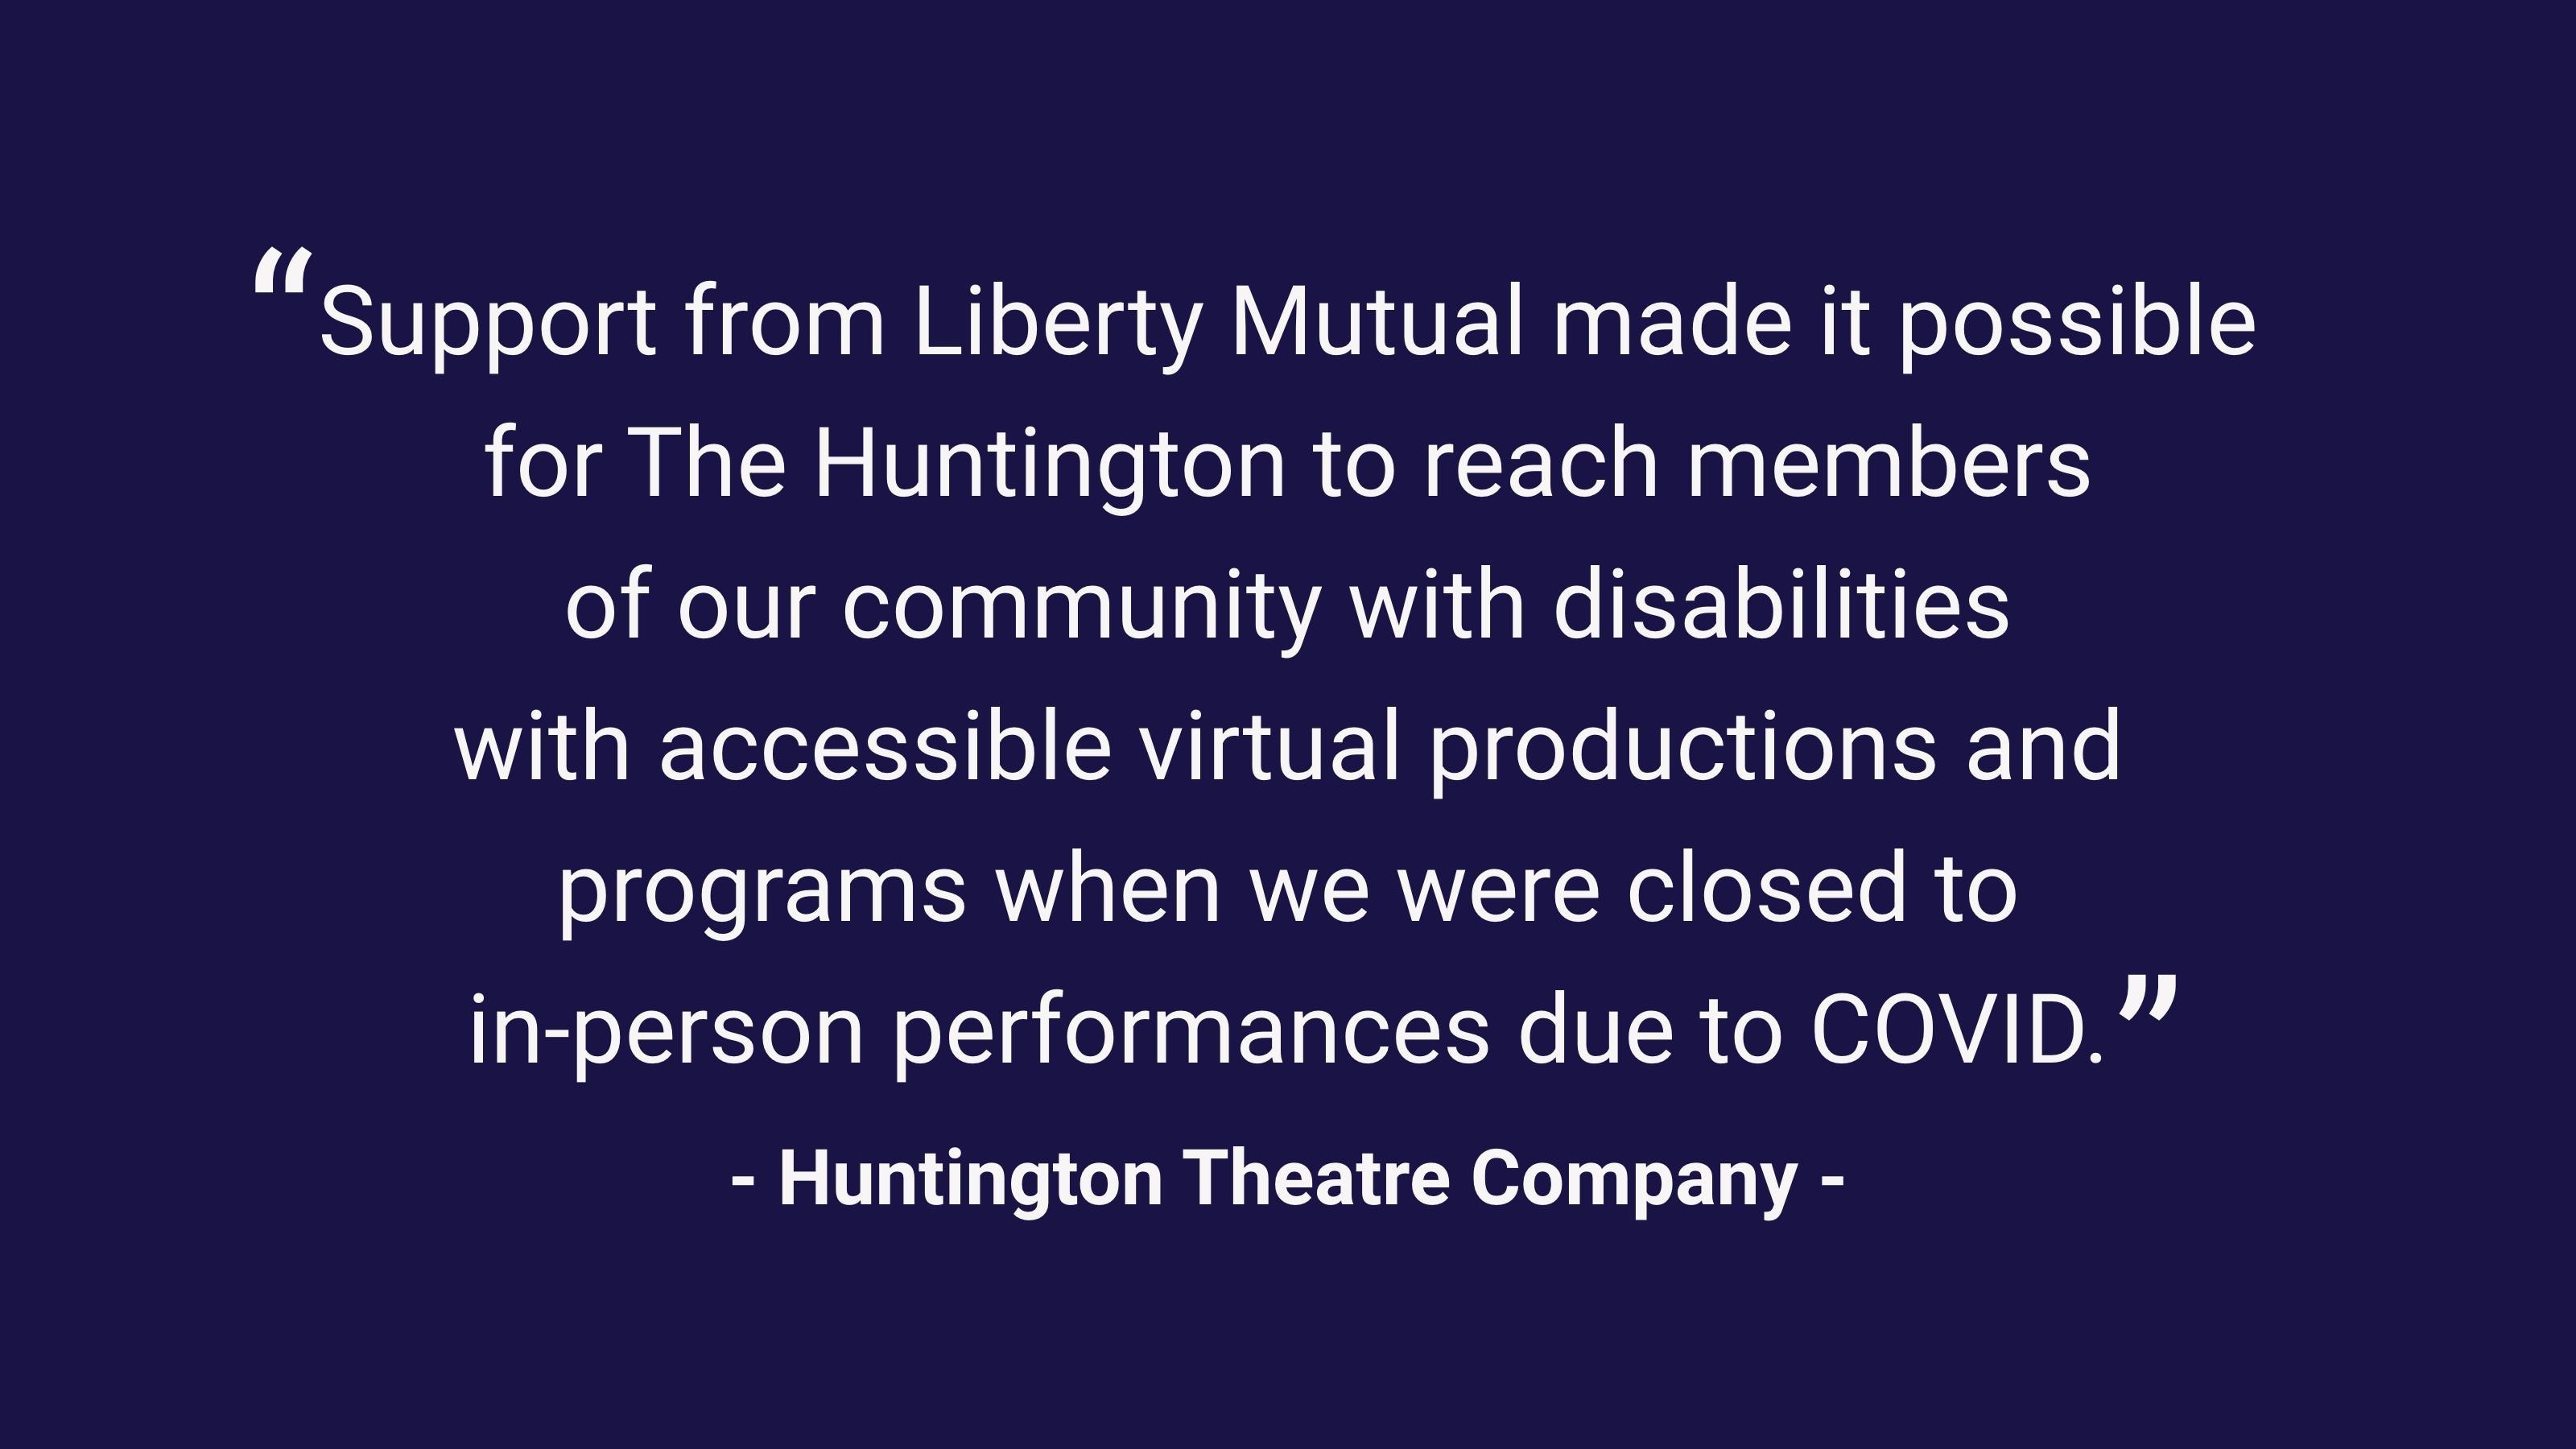 (slide 2 of 4) “Support from Liberty Mutual made it possible for The Huntington to reach members of our community with disabilities with accessible virtual productions and programs when we were closed to in-person performances due to COVID.”  –Huntington Theatre Company . 